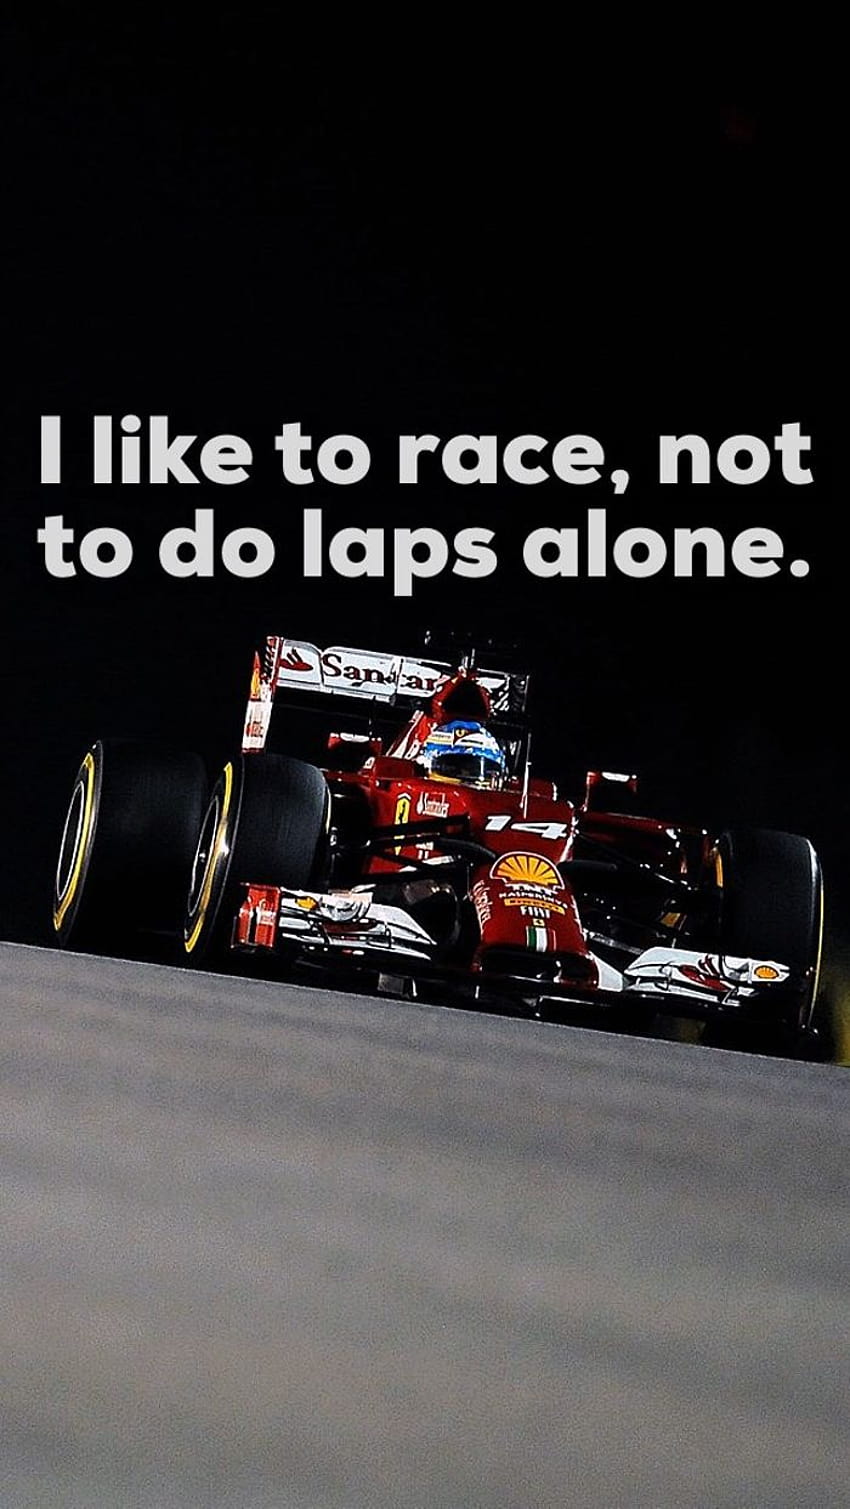 Another phone with a quote from Fernando Alonso, f1 quotes HD phone wallpaper